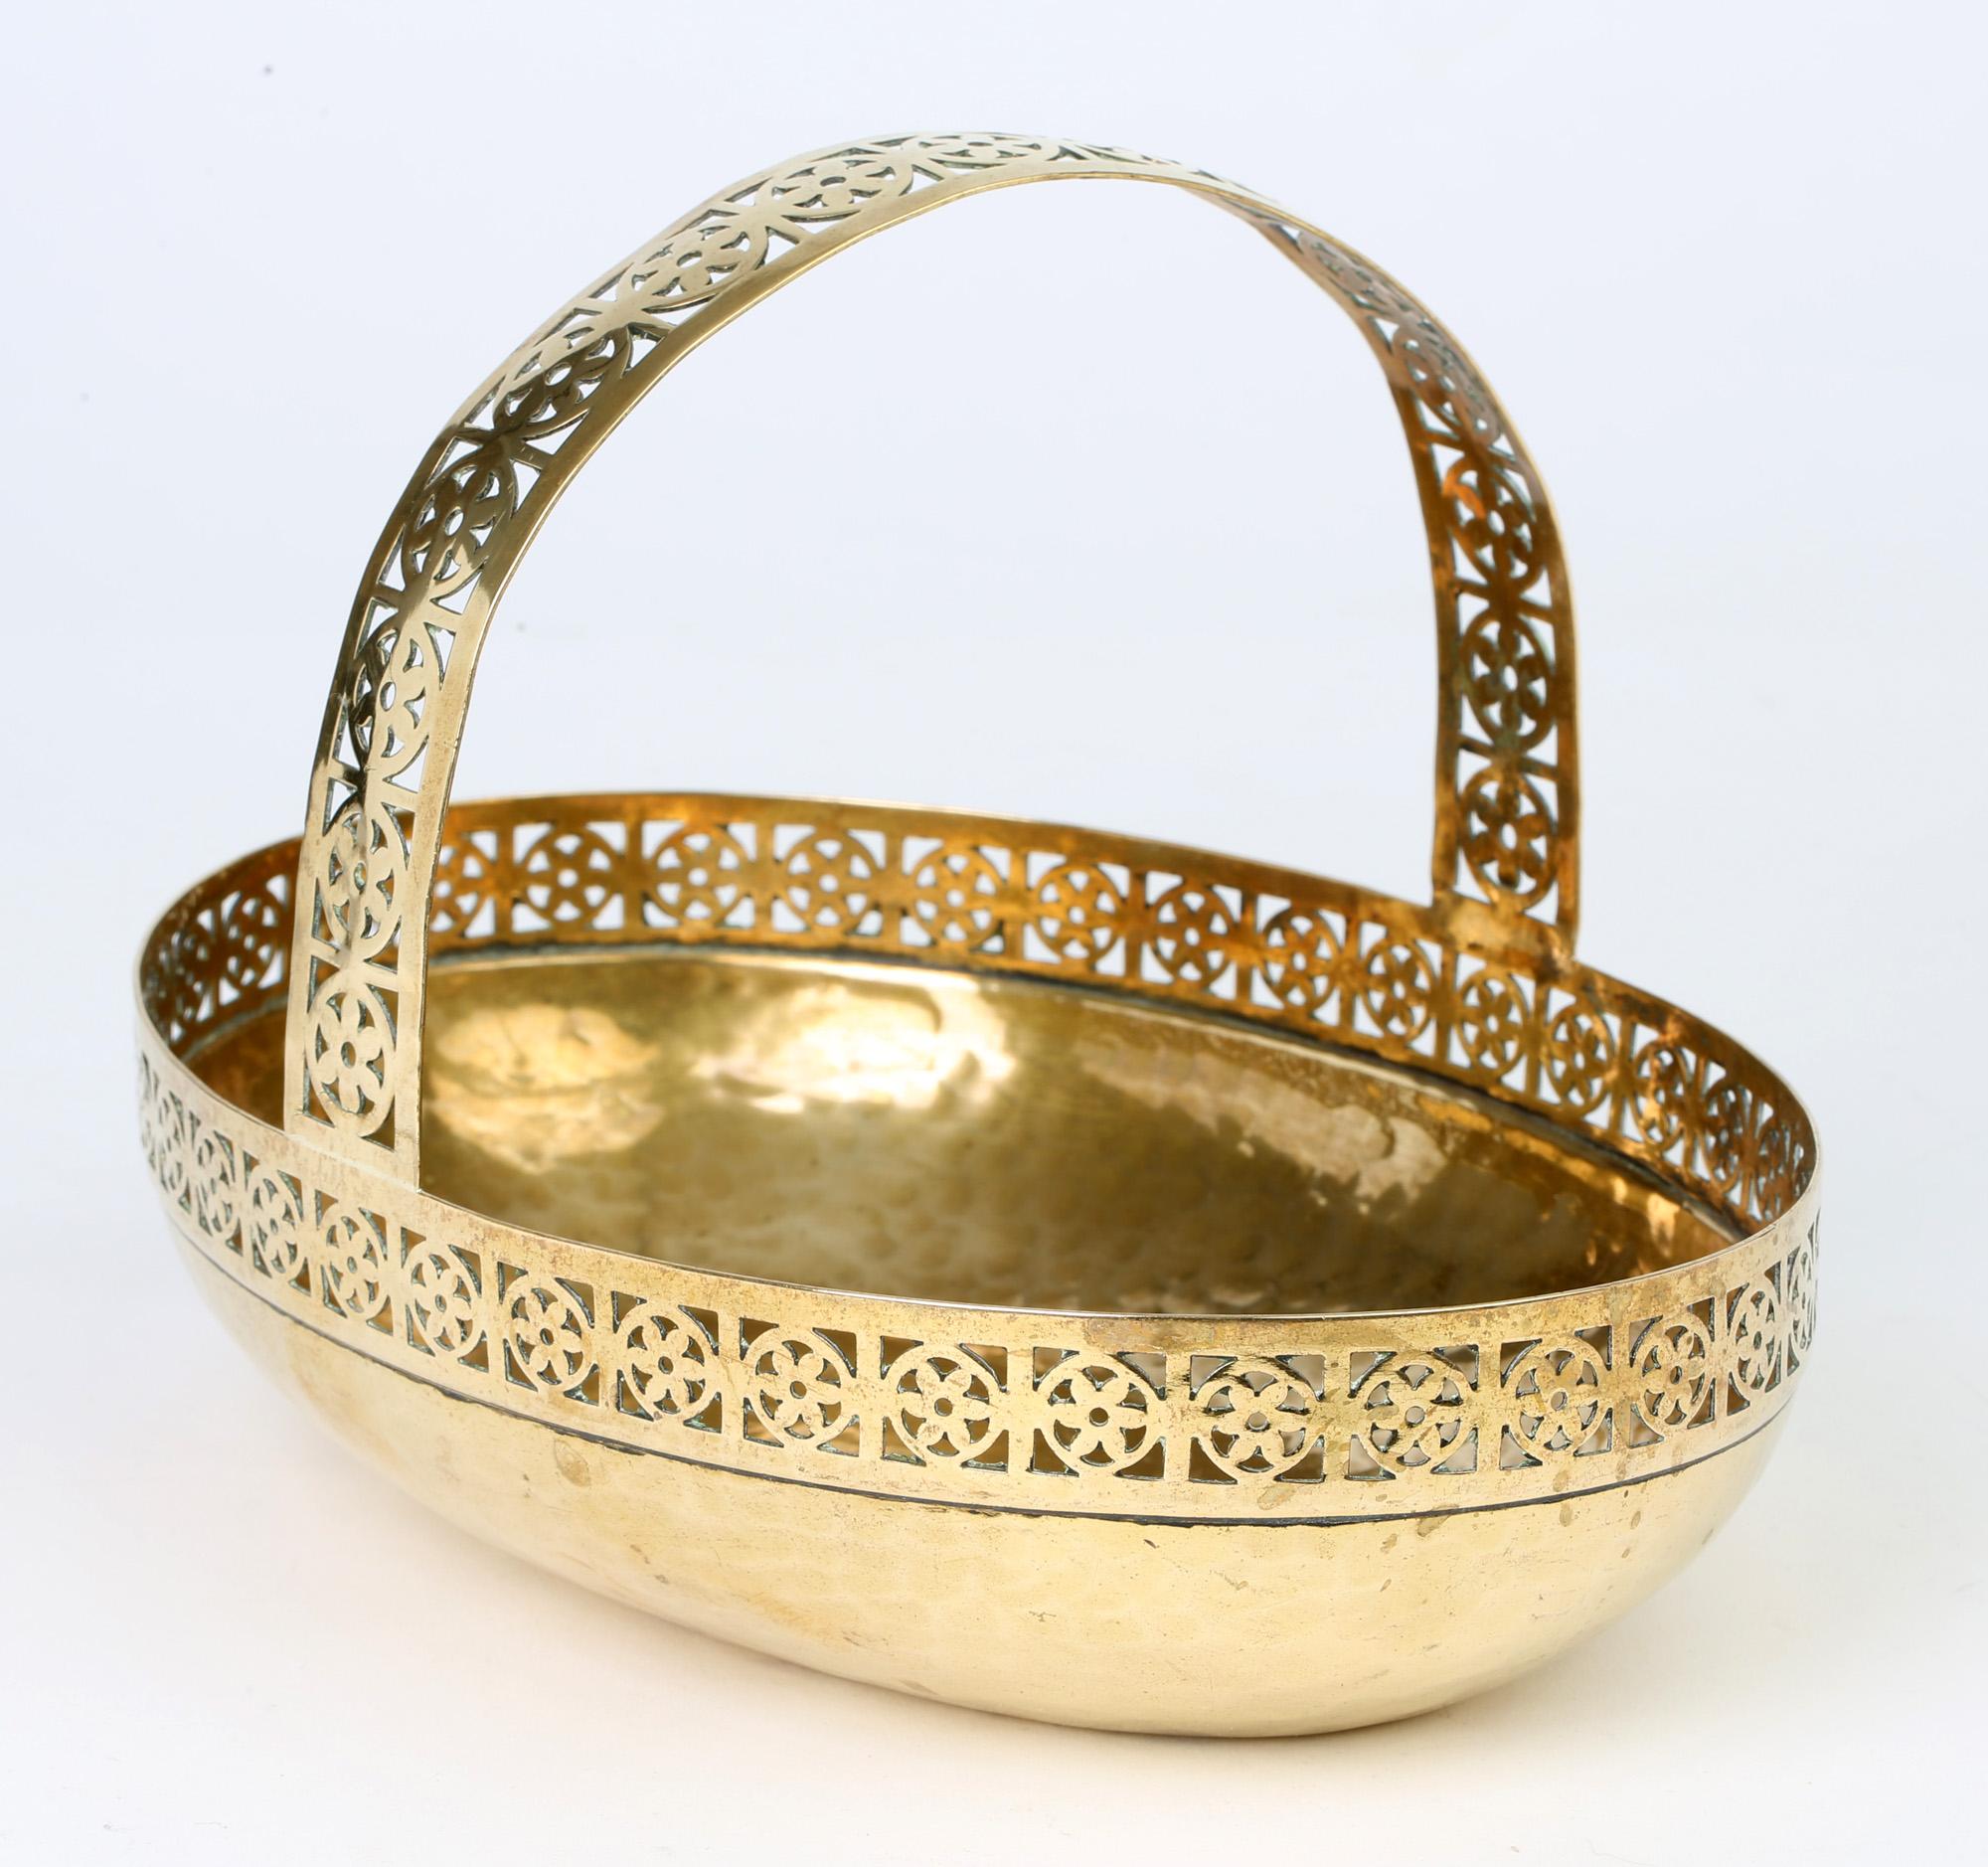 A very stylish German Jugendstil planished brass bread basket in the manner of Josef Hoffmann by WMF (Württembergische Metallwarenfabrik) and dating from circa 1910. The basket is of oval shape with a hammered body below a pierced rim with roundel